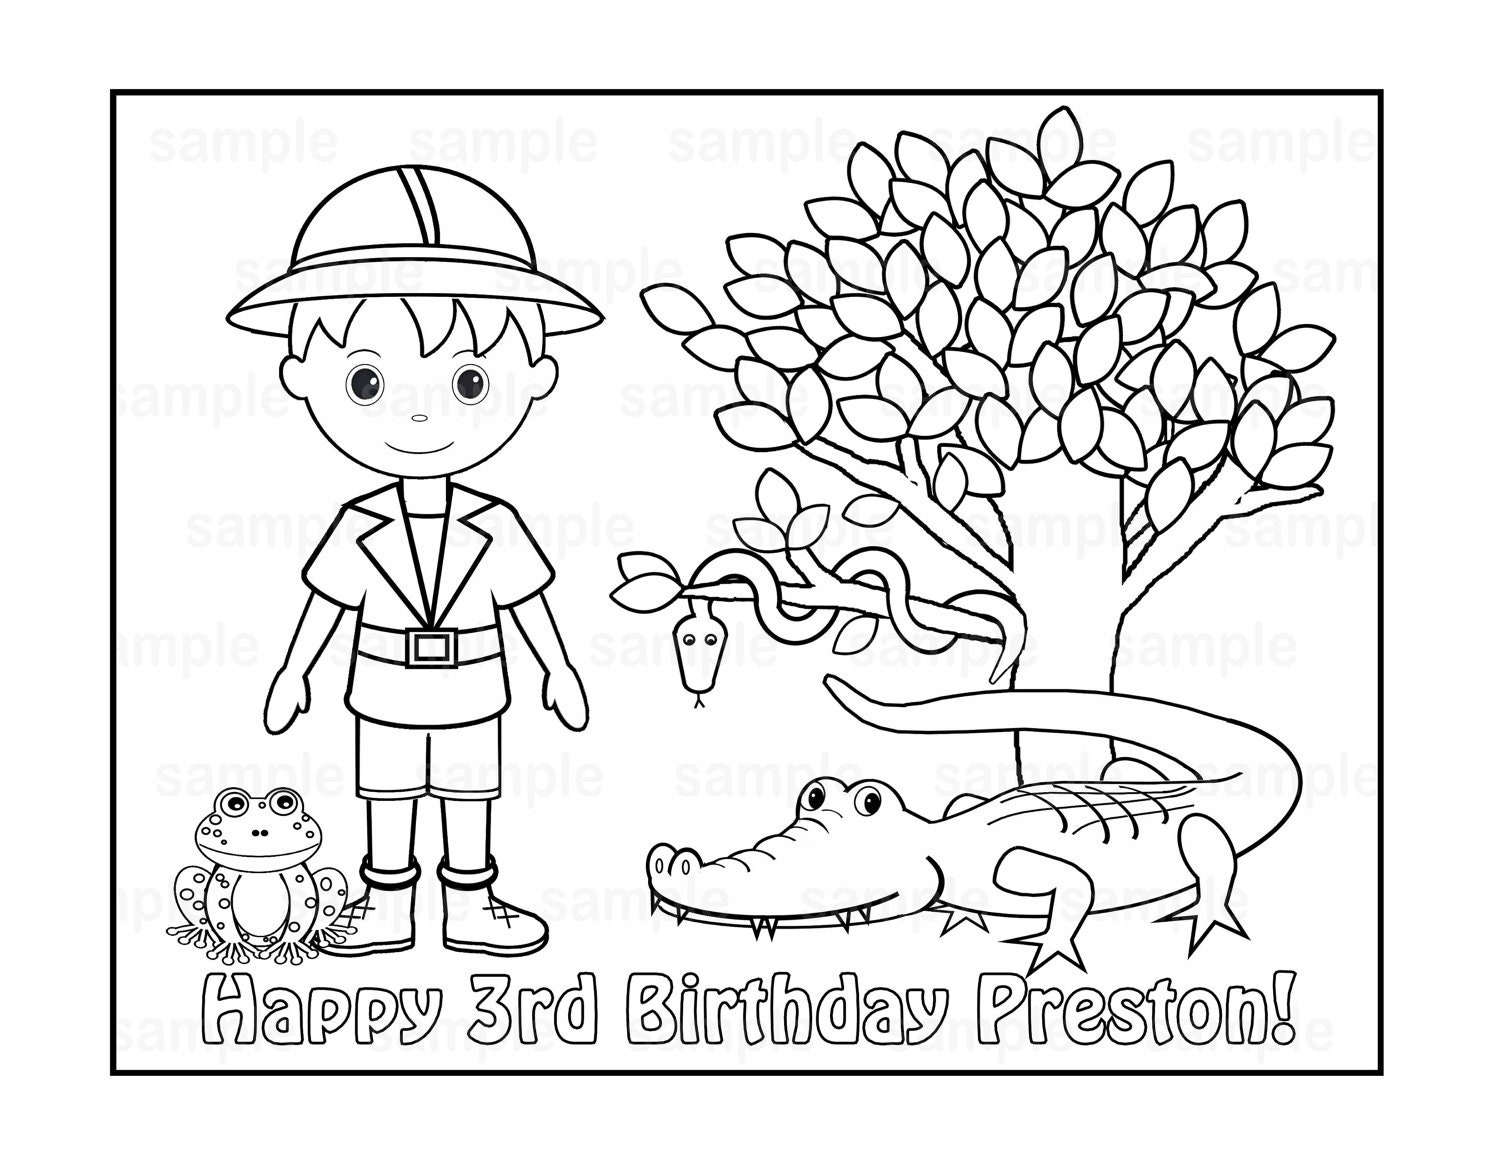 Personalized safari coloring page birthday party favor colouring activity sheet personalized printable template